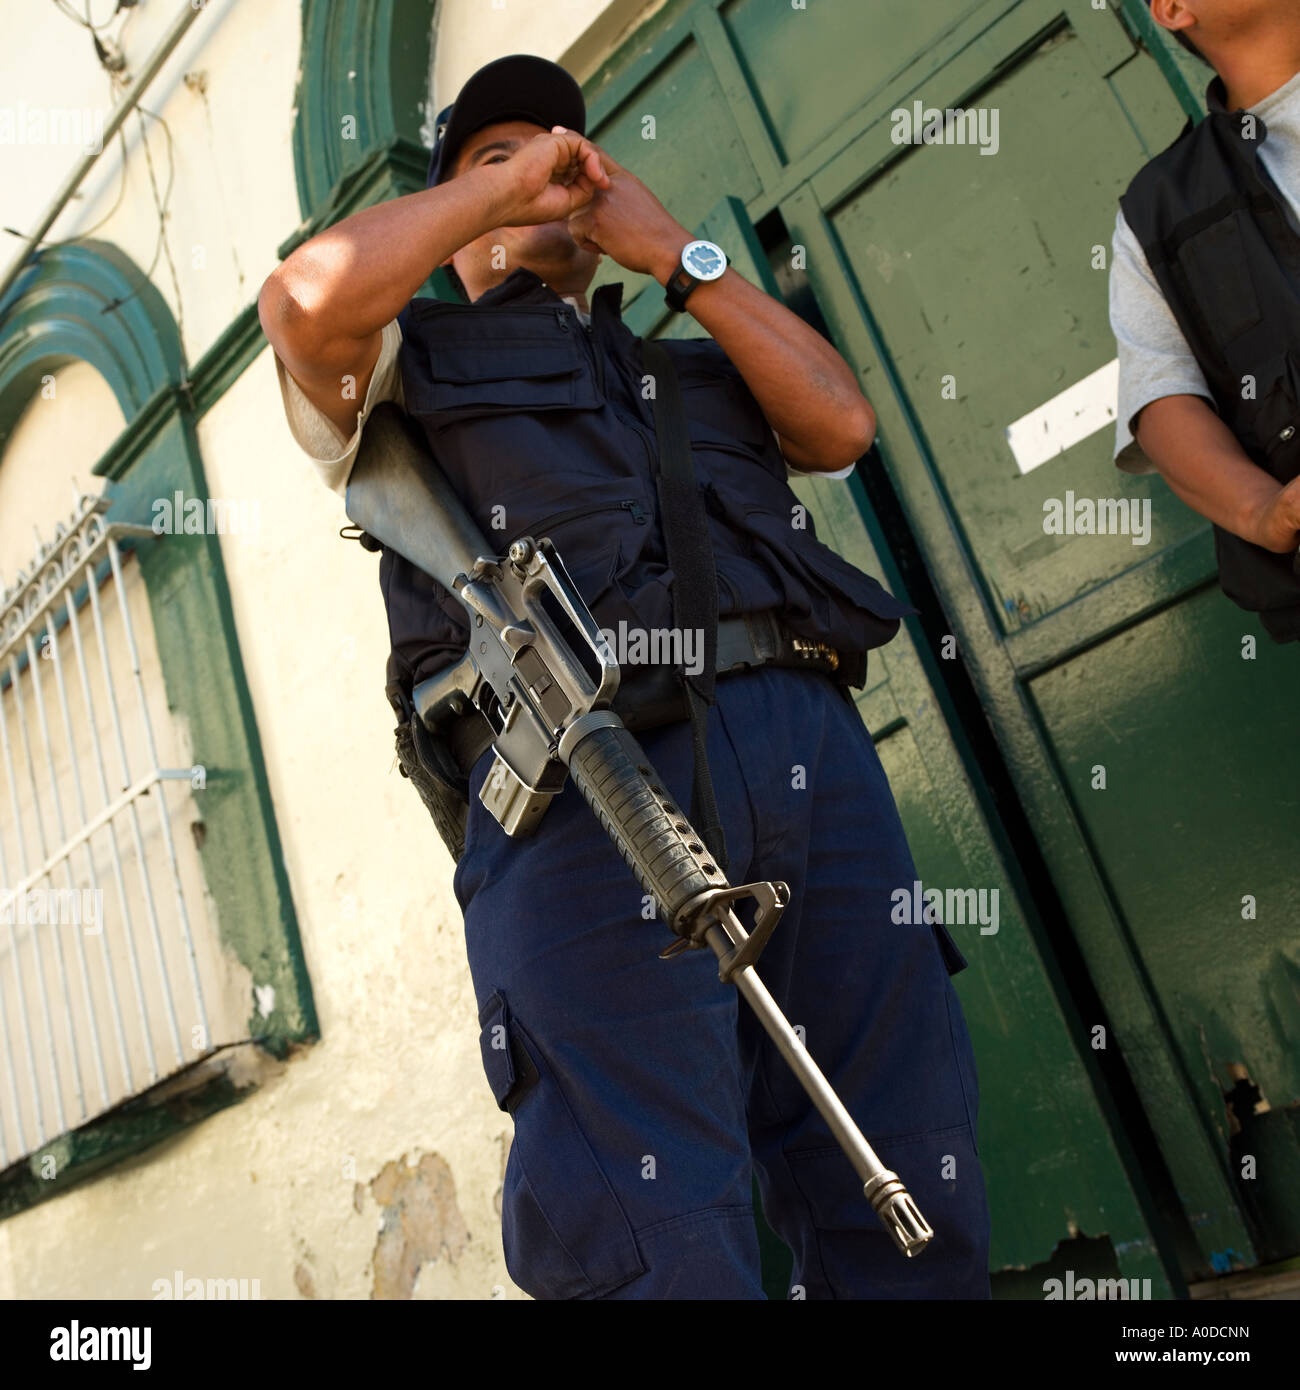 Mexican Police with armalite M16 rifle no model release required: crop makes people unrecognisable Stock Photo